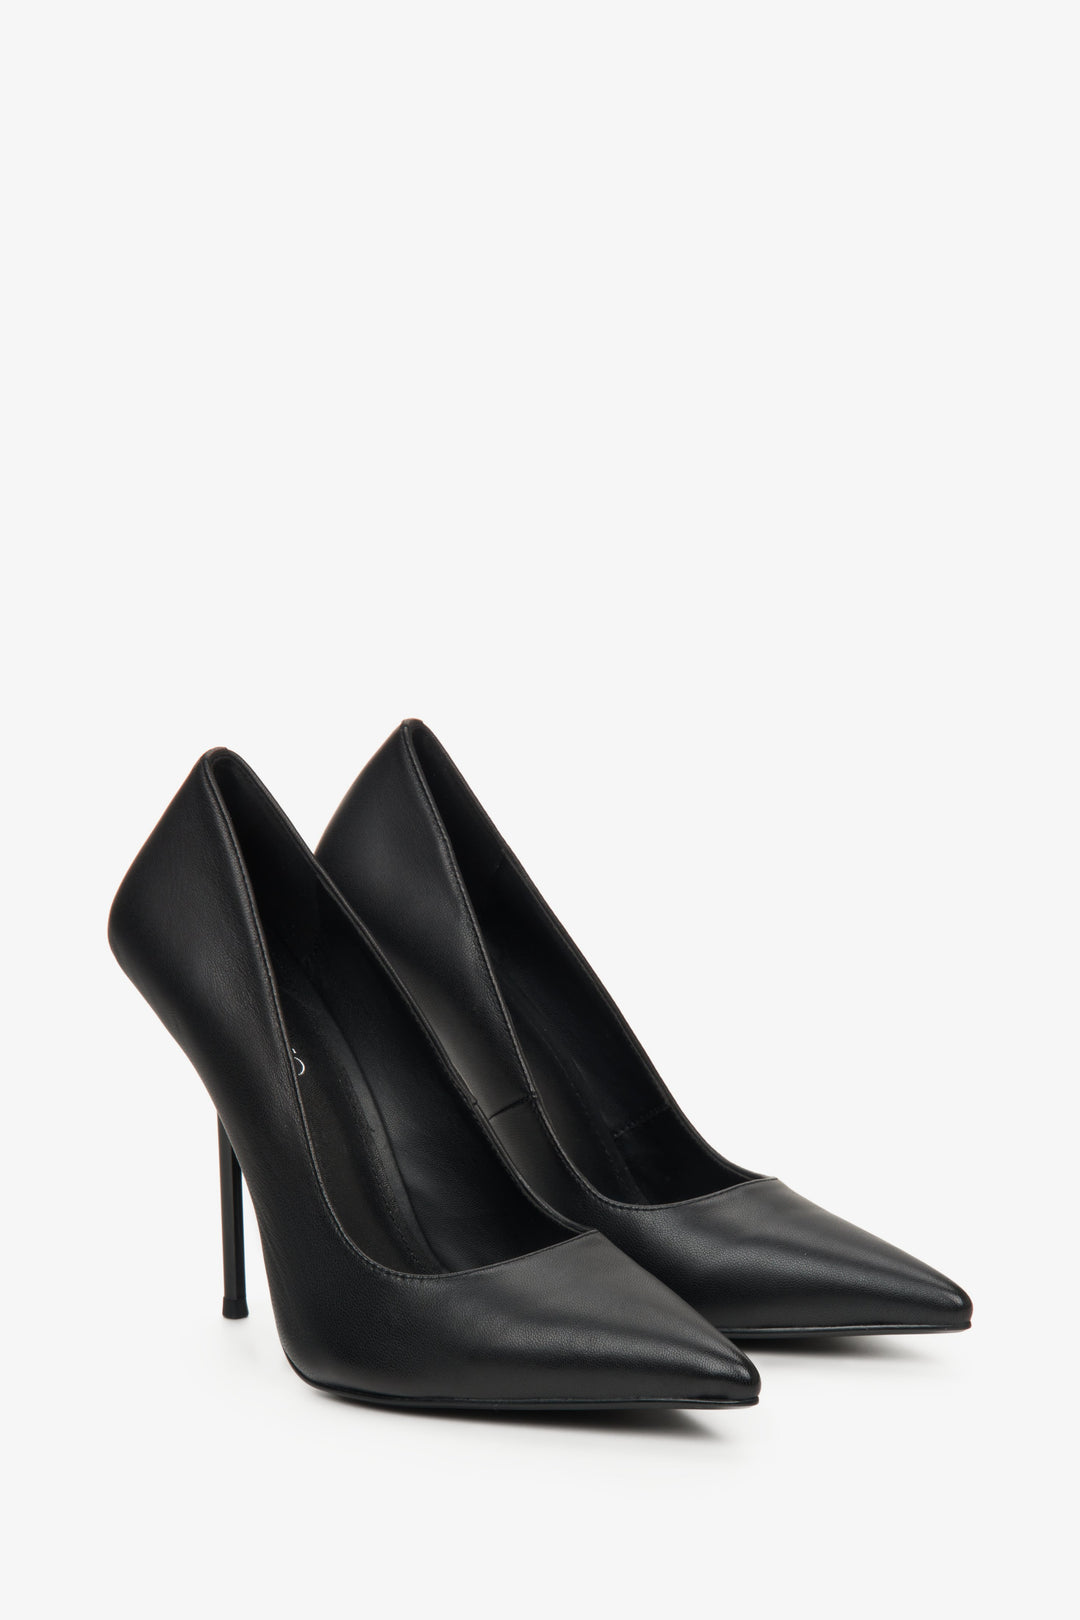 Women's black leather stiletto heels with a pointed toe.